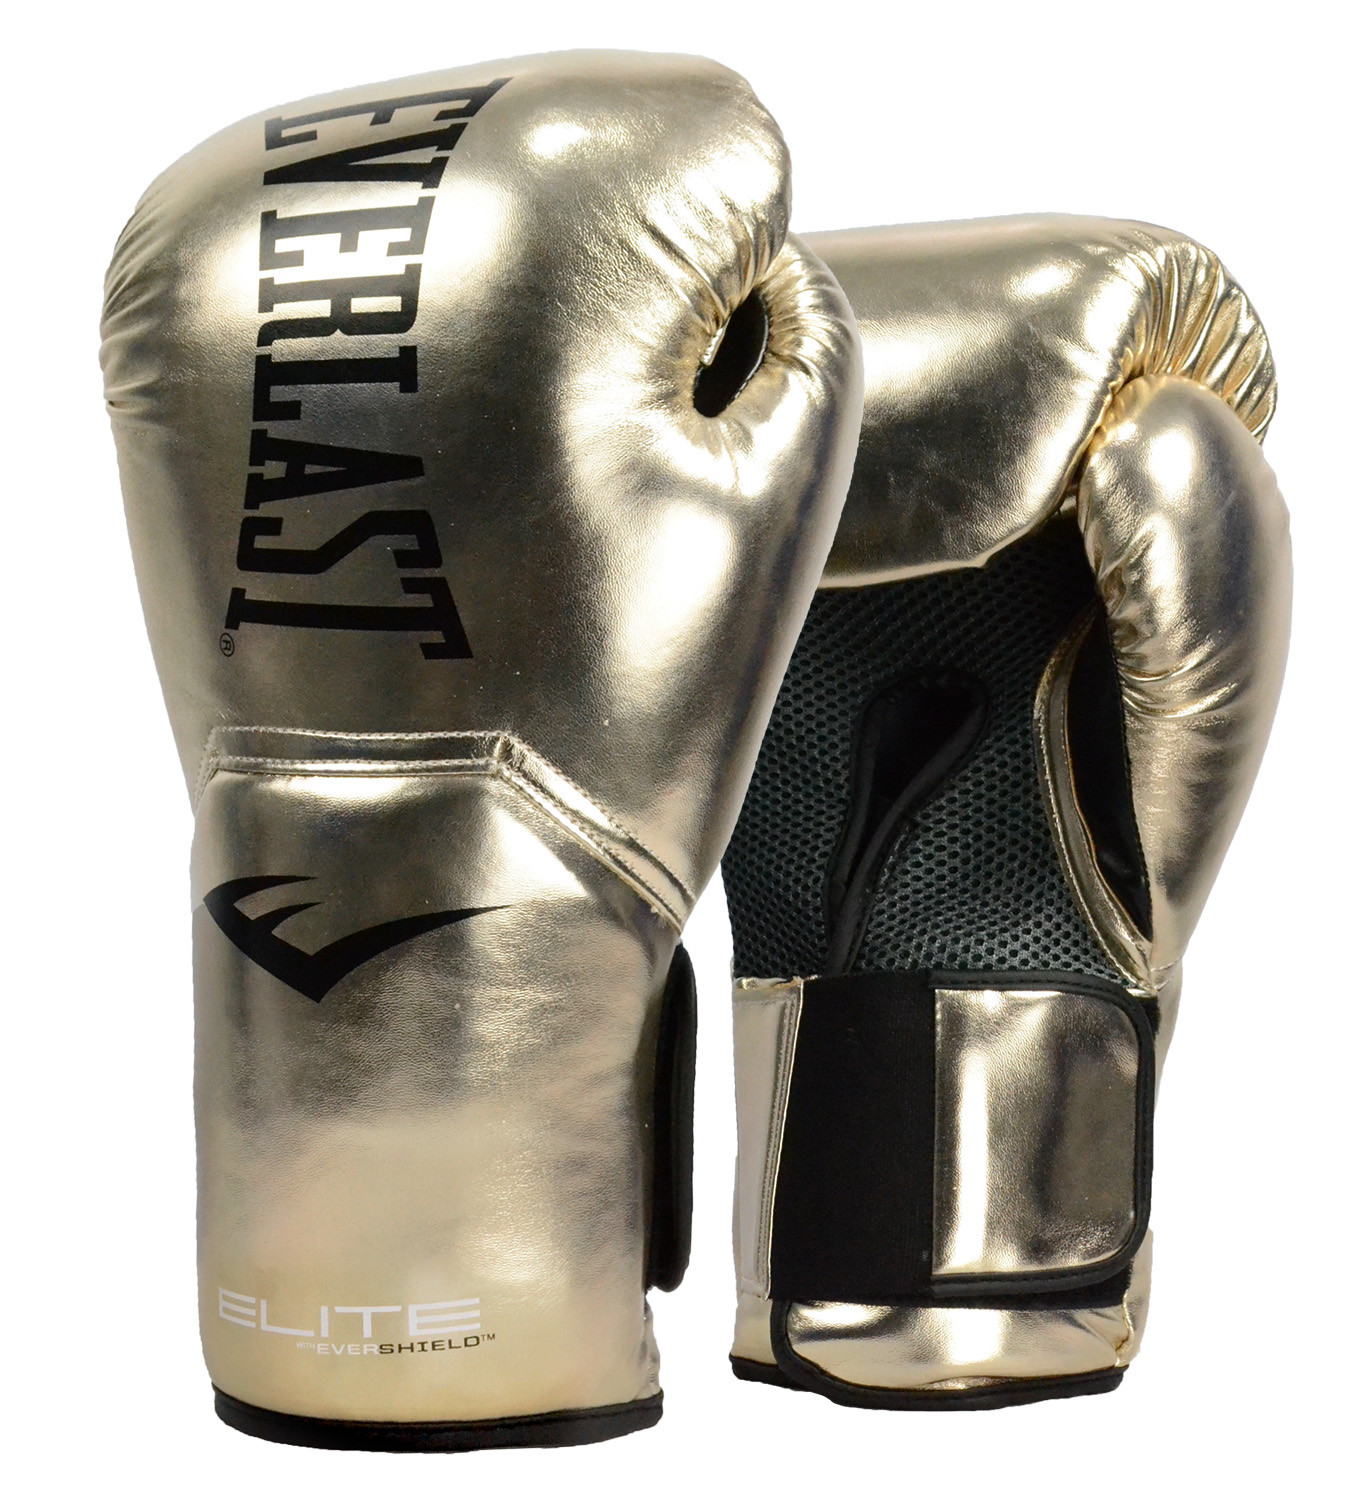 Guantes boxeo Everlast, guantes class training